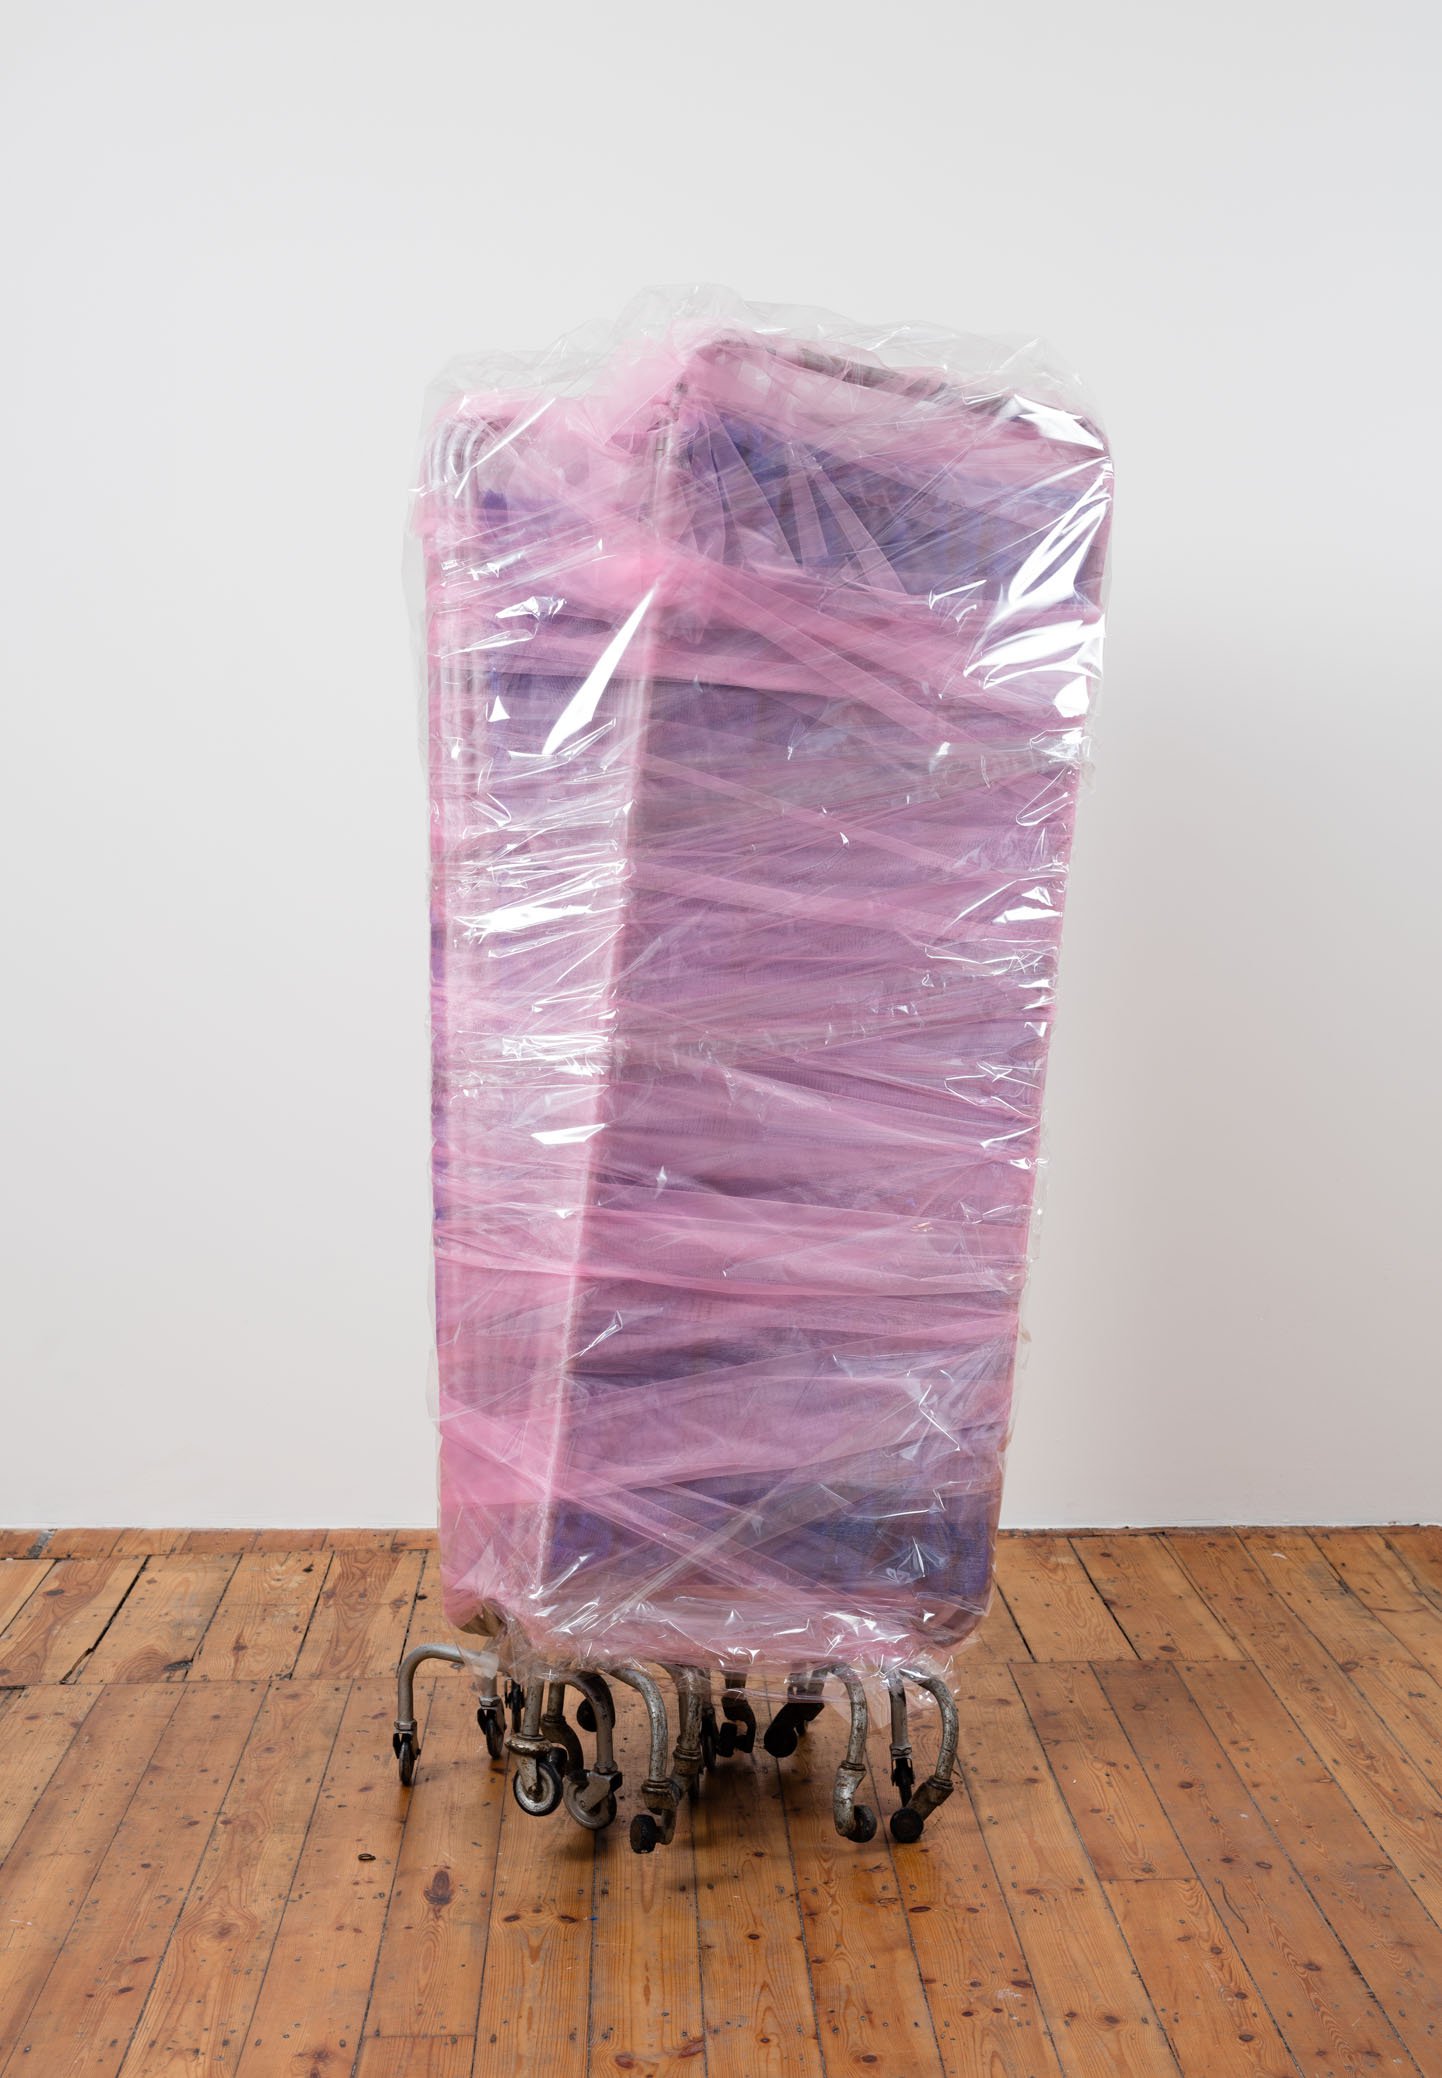 Ian Law, There was a body, I was there, was a body, medical privacy screens with soft toy fur fabric, curtain netting and organza, gift wrapped, 172 x 86 x 47 cm, 2016